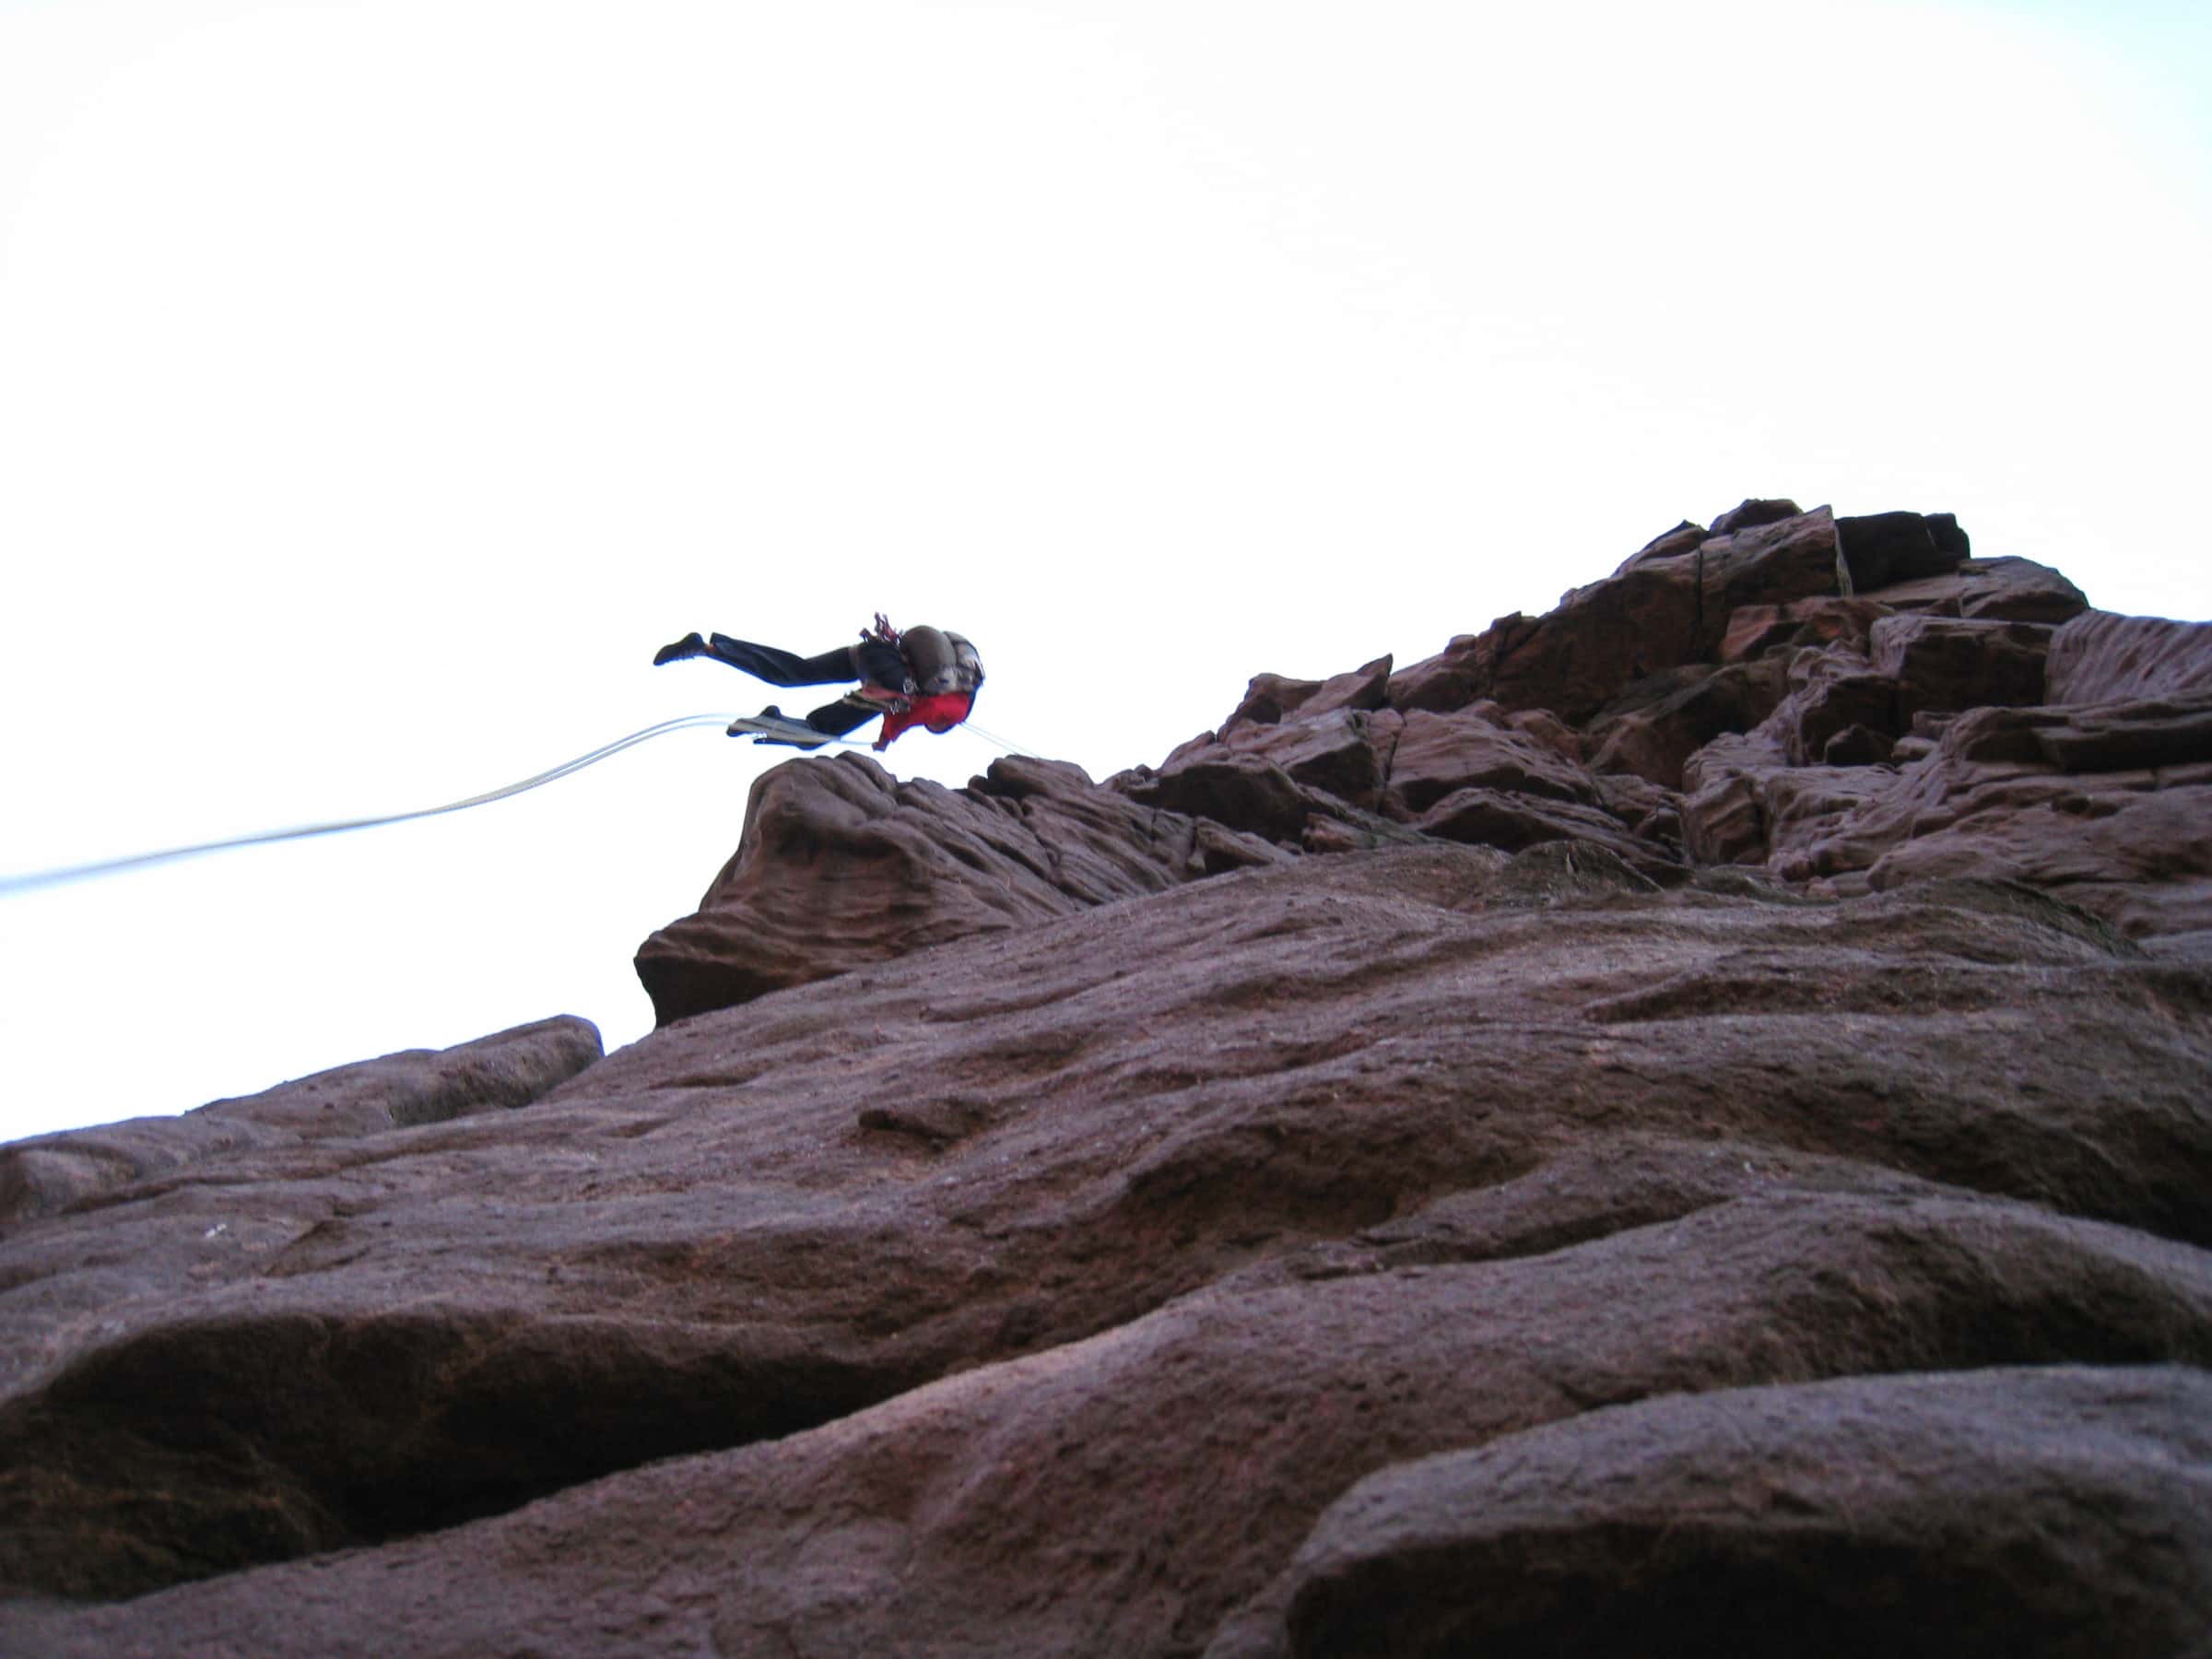 The Old Man of Stoer abseil down